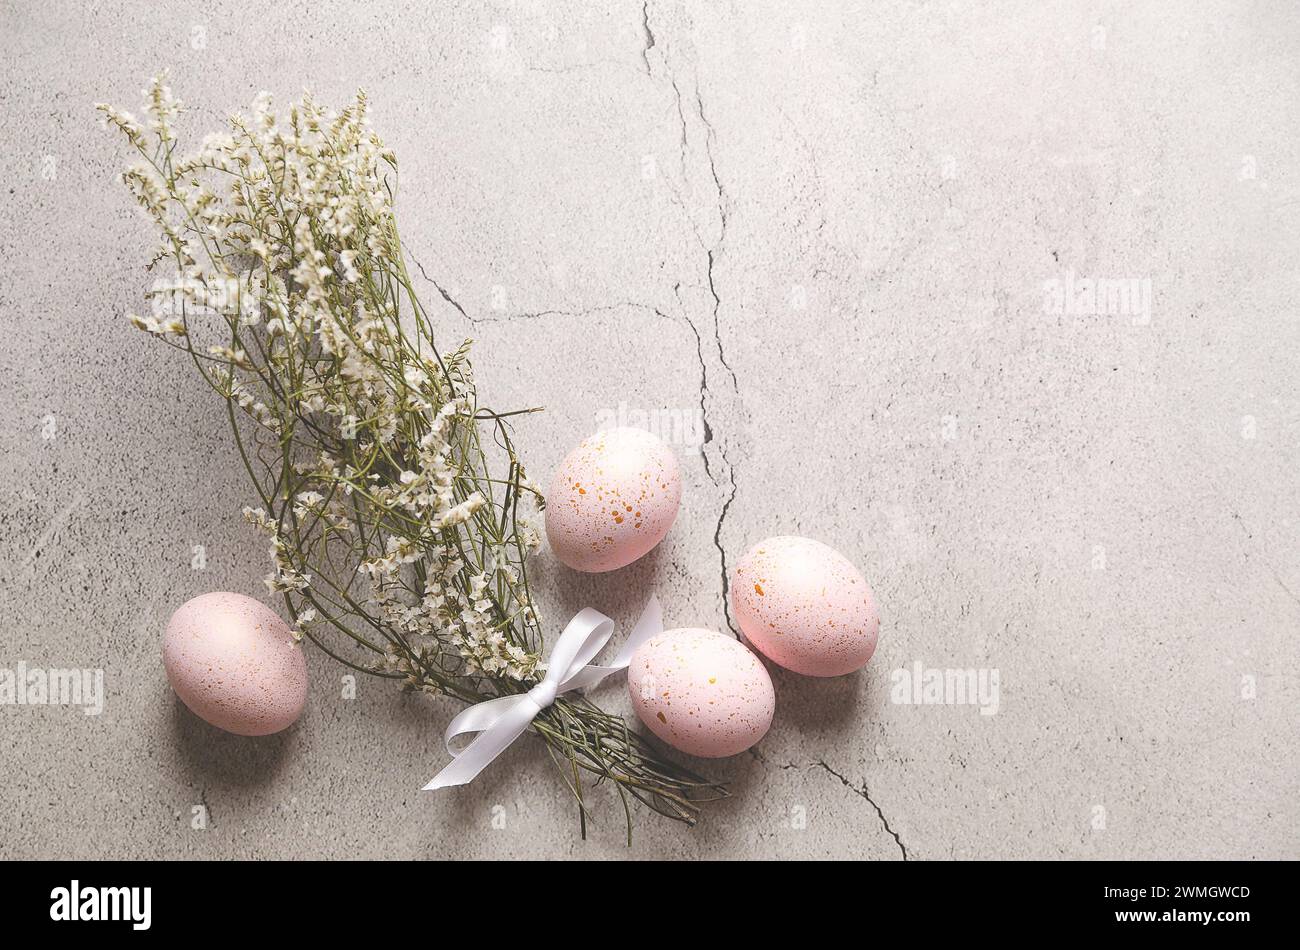 Pink Easter eggs with golden spots  and gypsophila flowers on gray stone background with copy space. Stock Photo